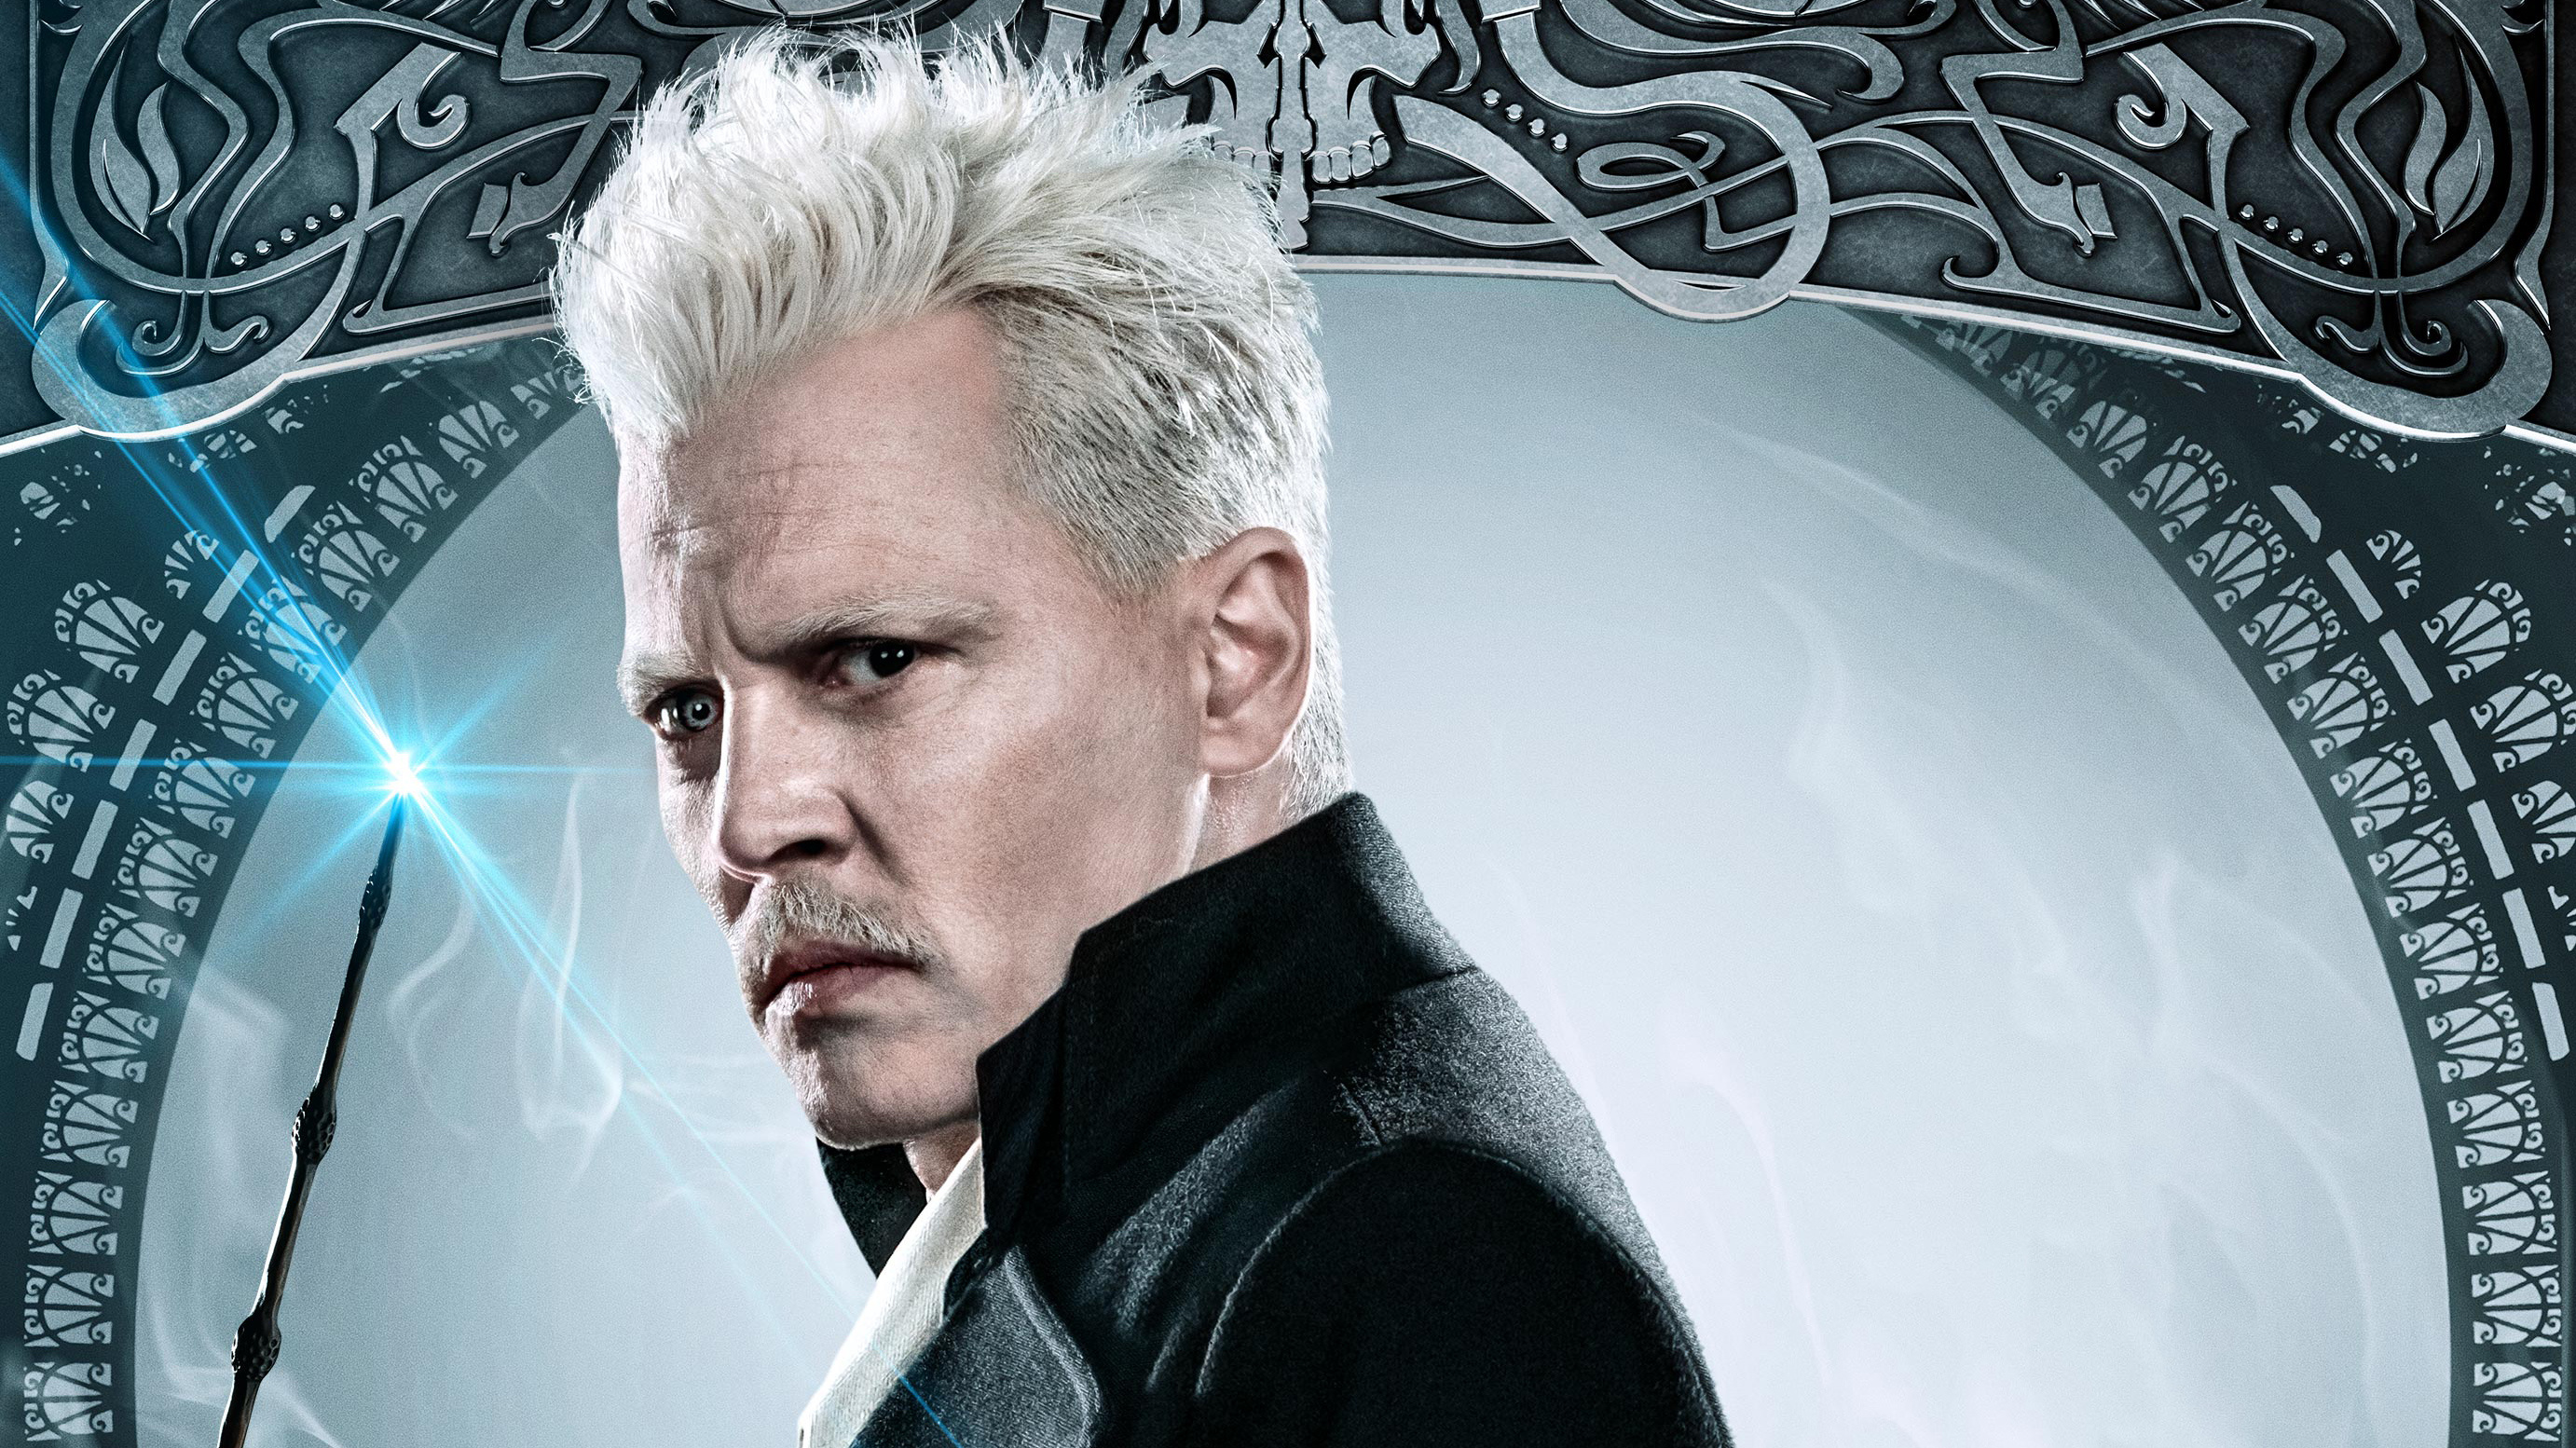 Johnny Depp as Grindelwald, Fantastic Beasts, HD movies, High-quality images, 2770x1560 HD Desktop